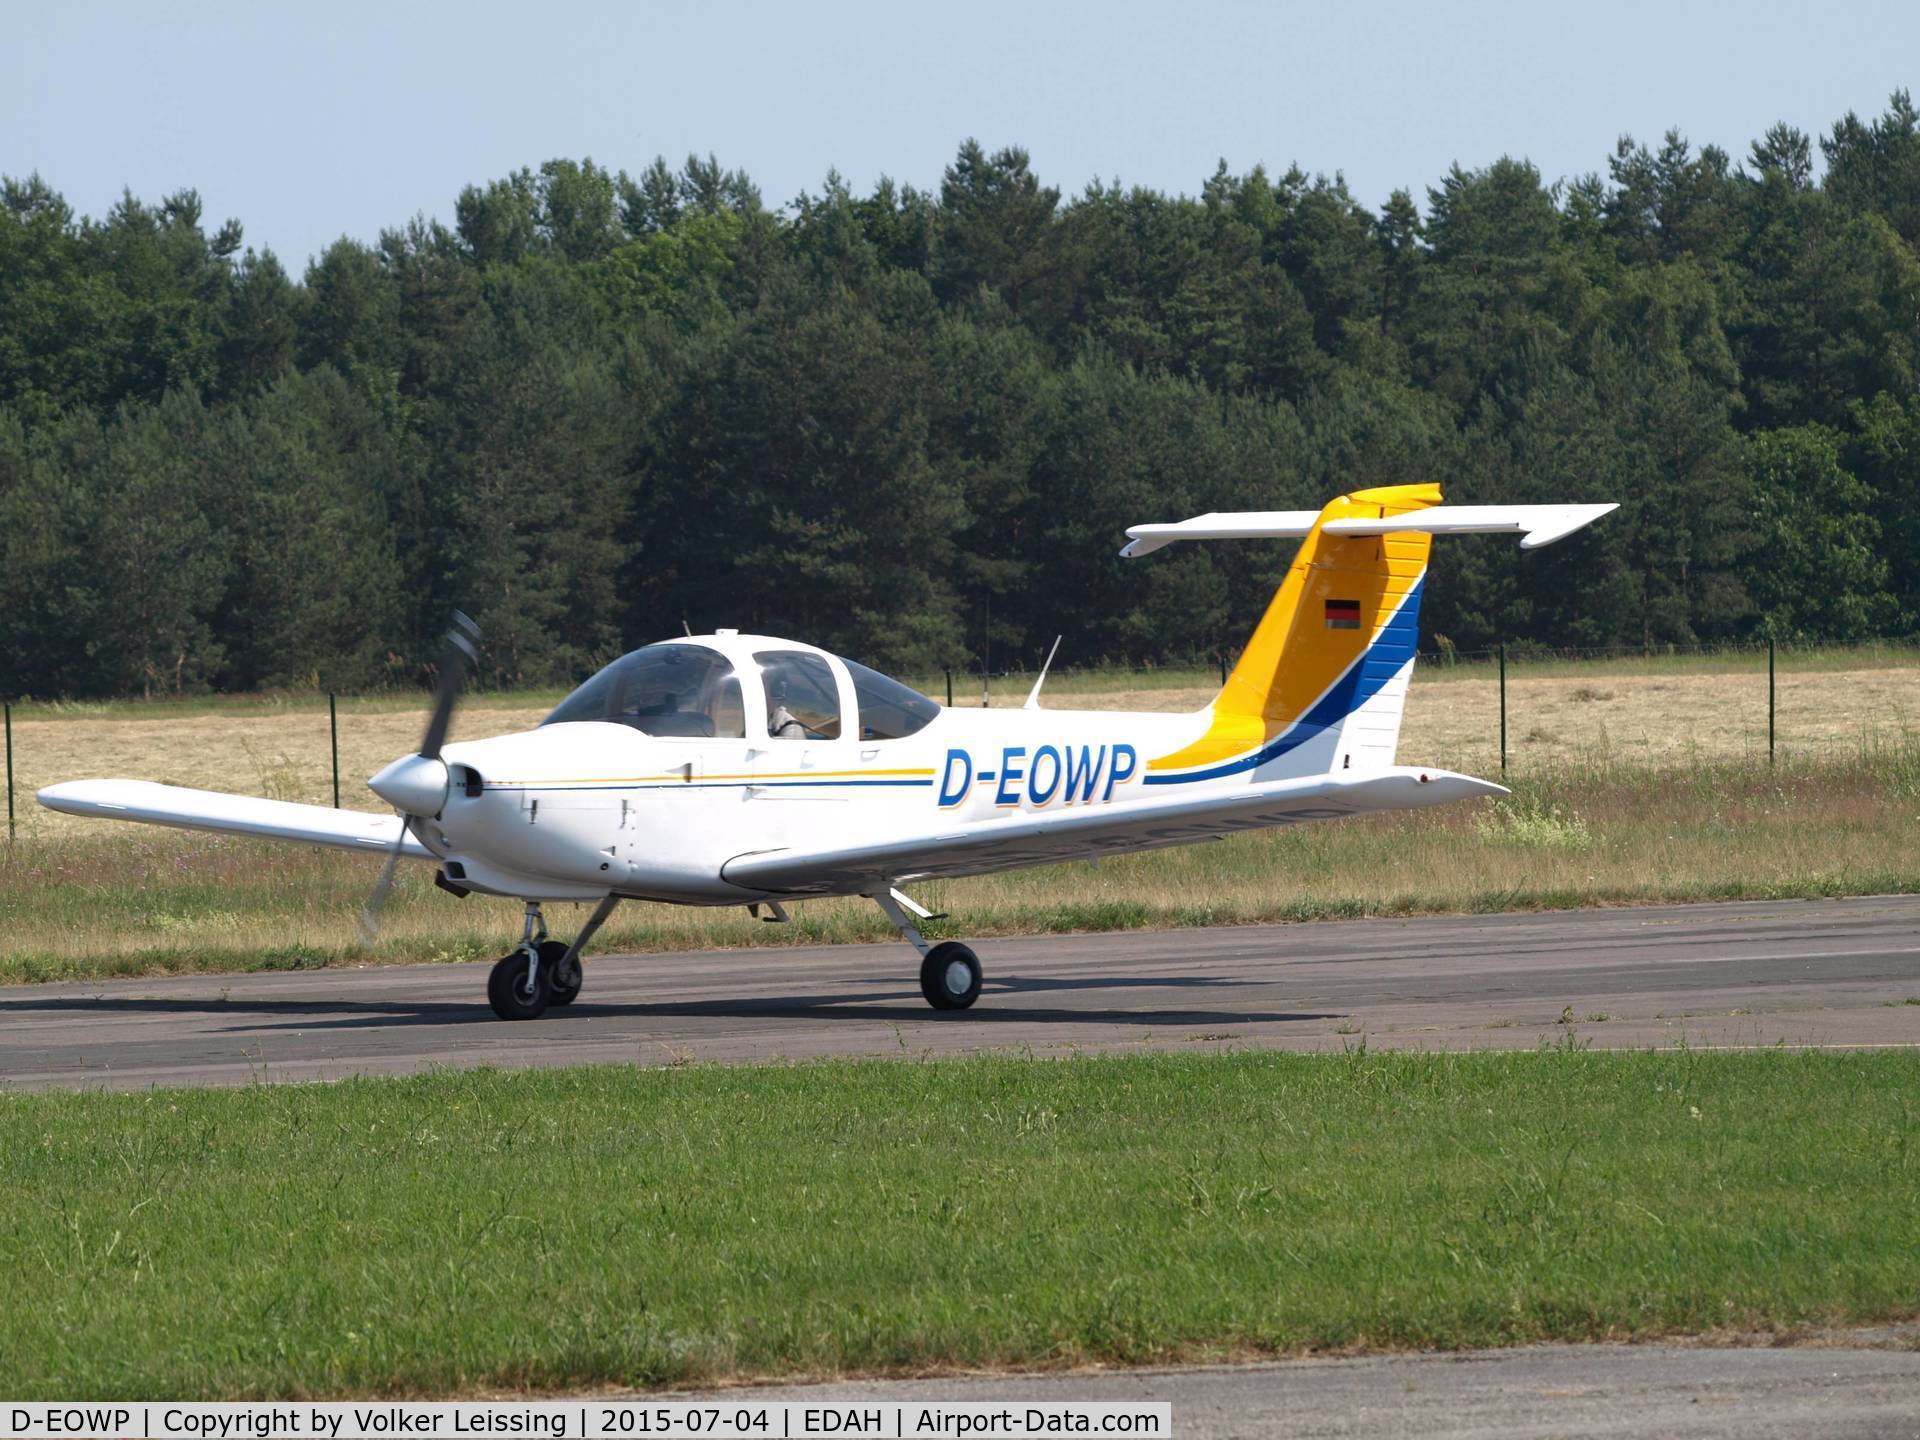 D-EOWP, 1982 Piper PA 38-112 Tomahawk C/N 38-79A0336, taxiing